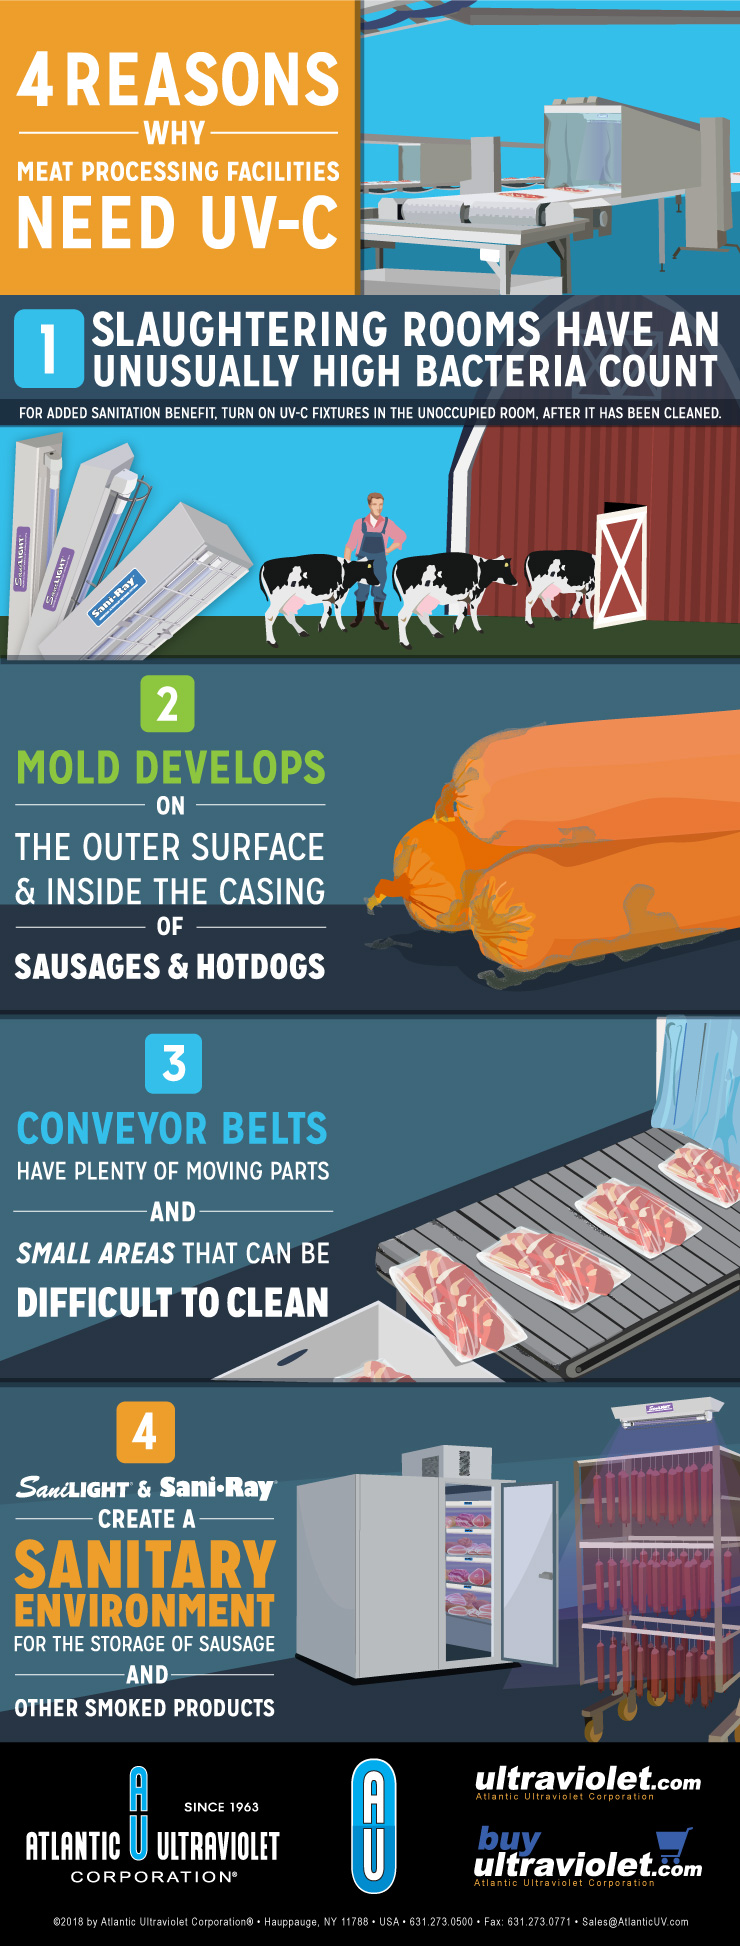 UV-C Keeps Meat Processing Facilities Sanitary - Infographic